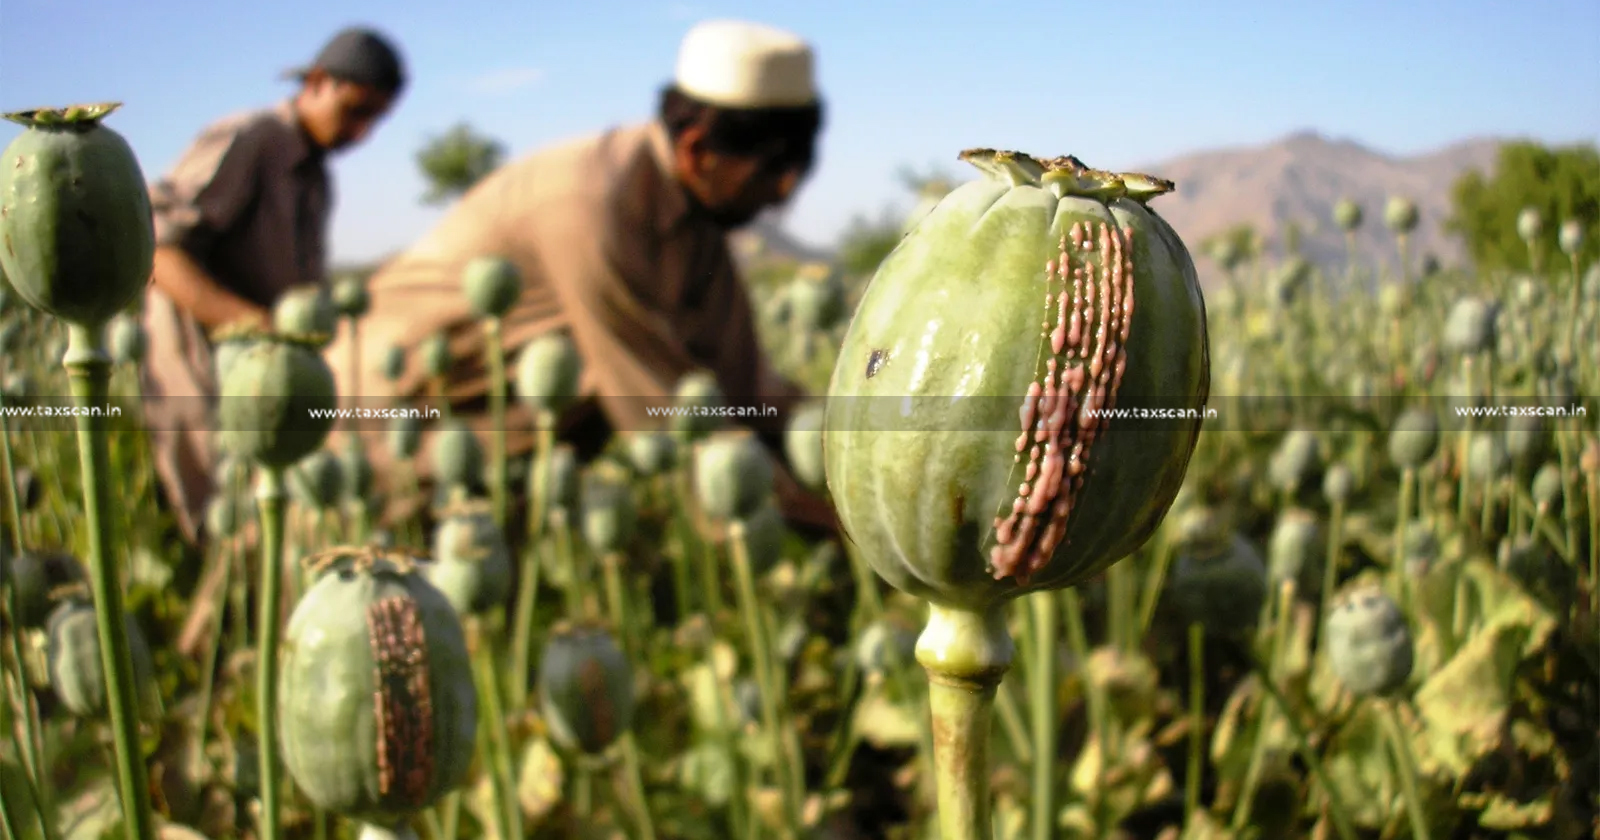 Ministry of Finance - Annual Licensing Policy - Cultivation of Opium Poppy for Production of Poppy Straw - Opium Poppy- taxscanA